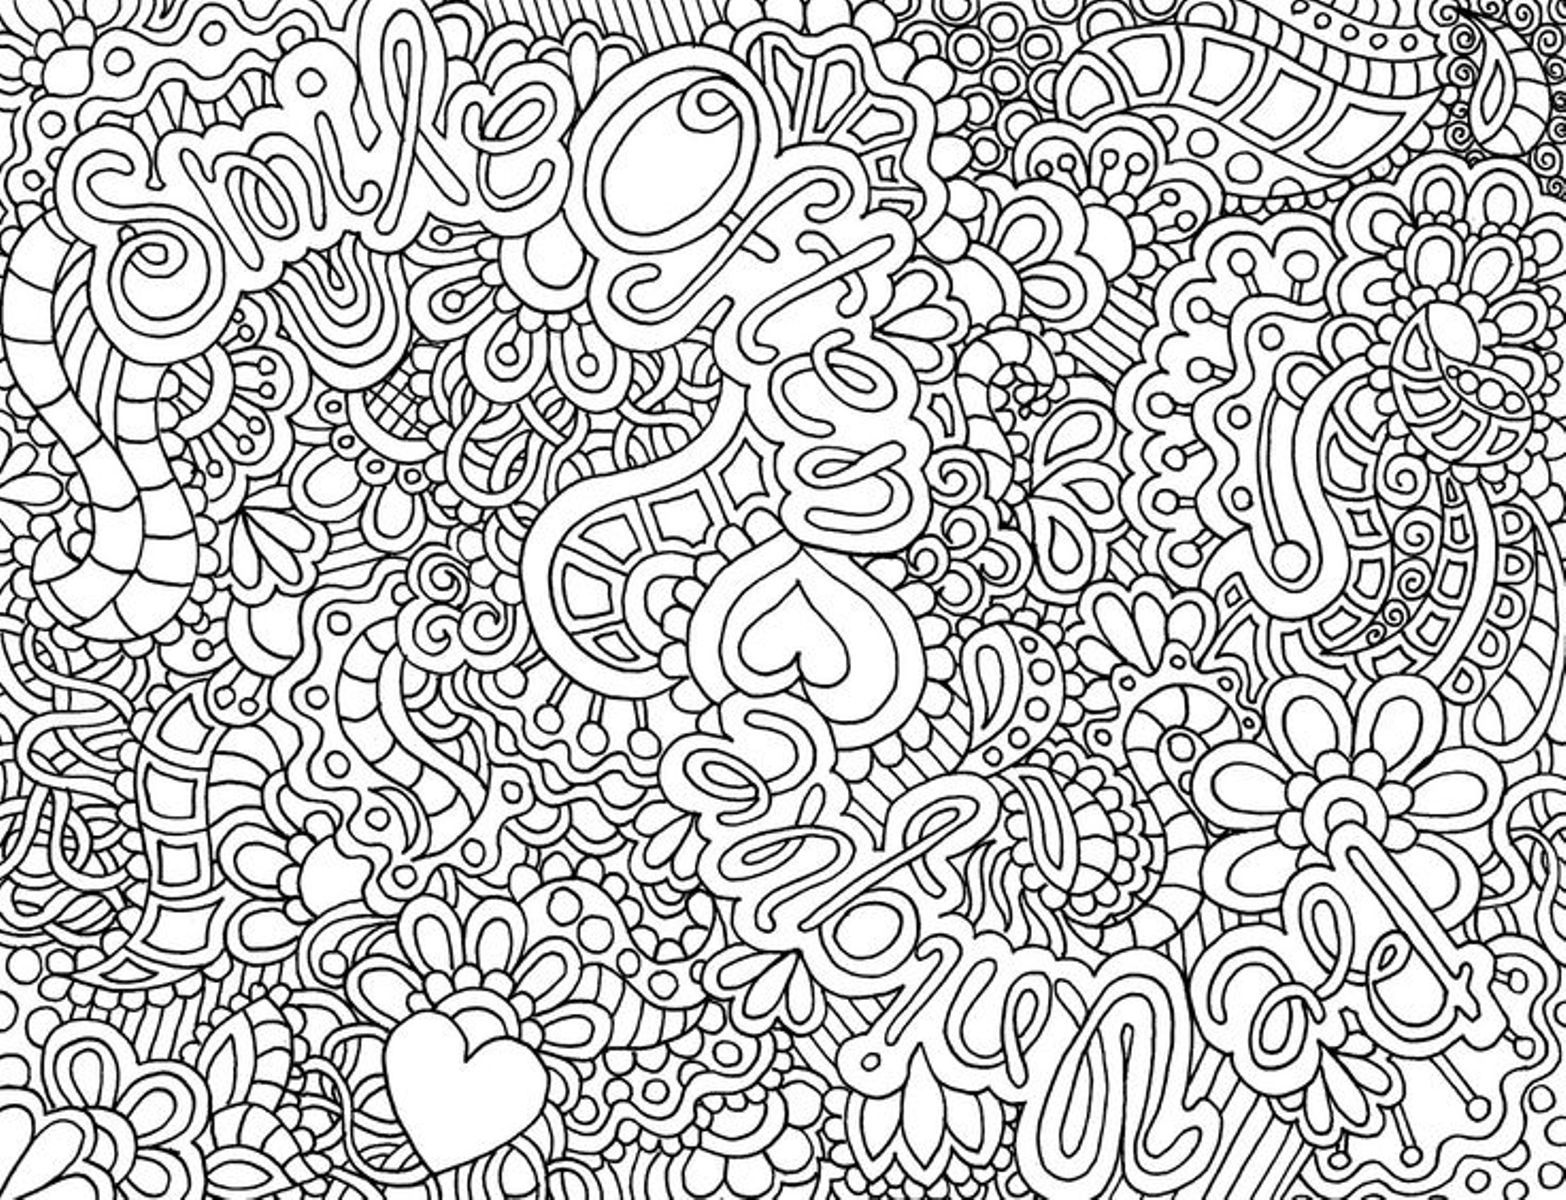 Free Printable Adult Coloring Pages Unique Abstract Image 363 ...